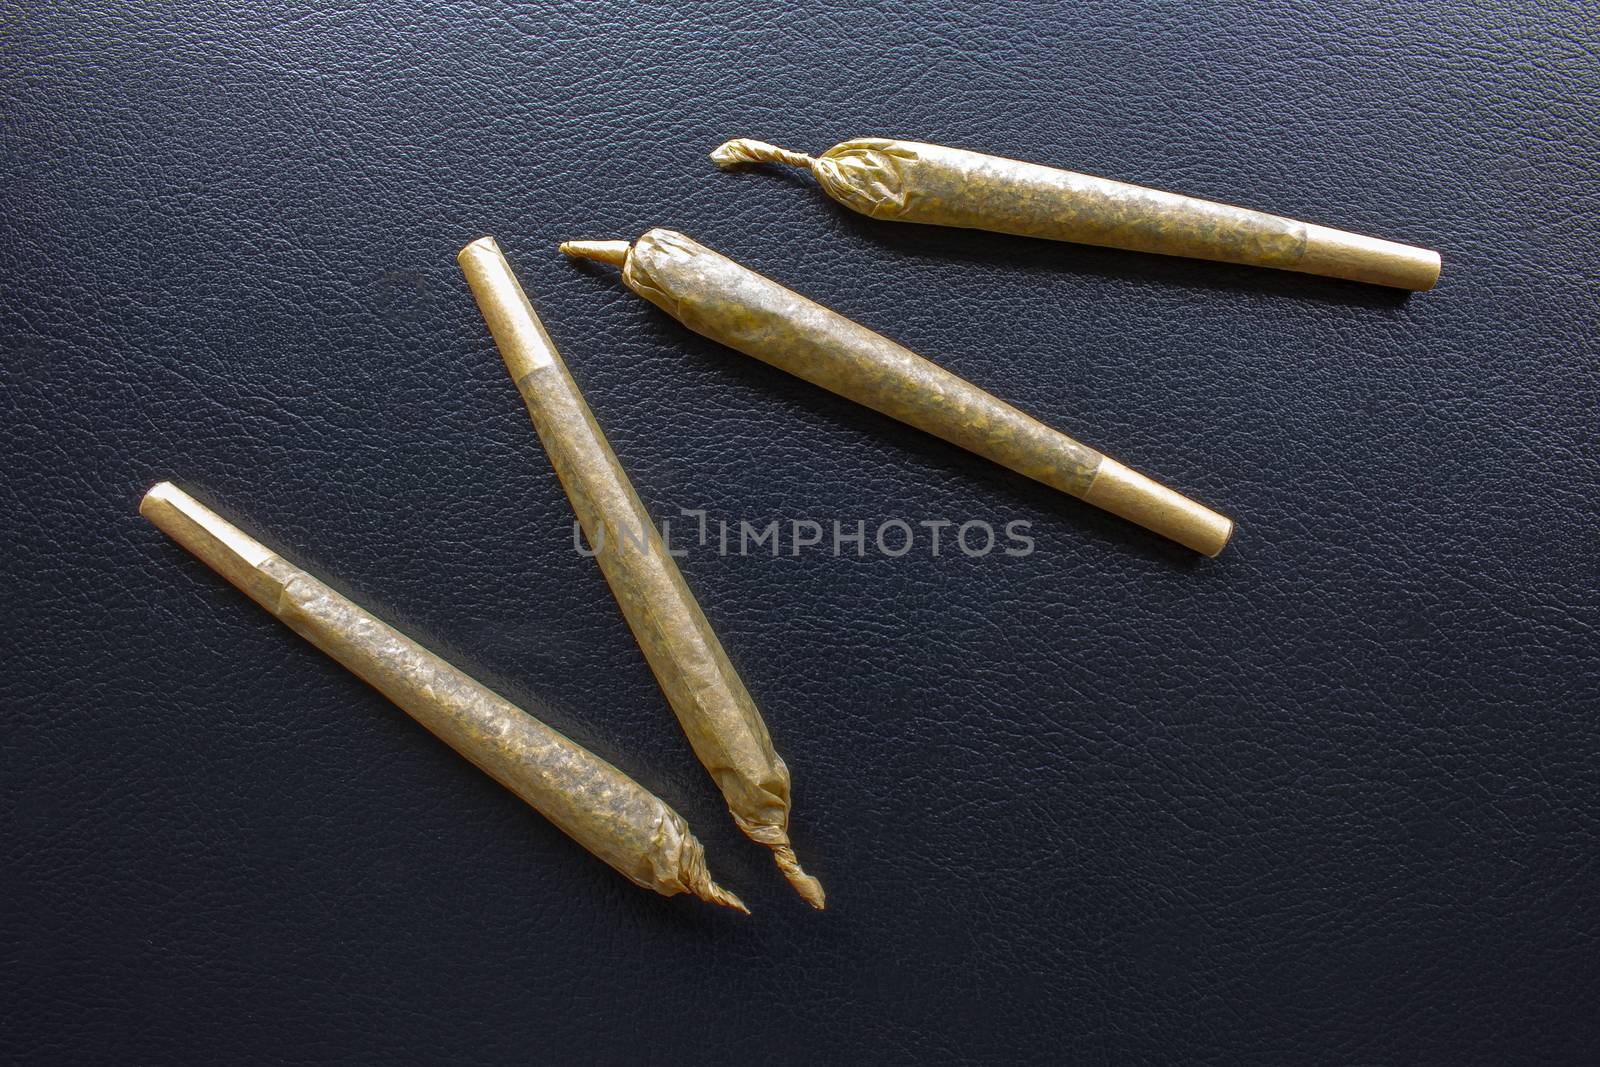 Cannabis Pre-Roll Joints Cigarettes on a leather black texture.